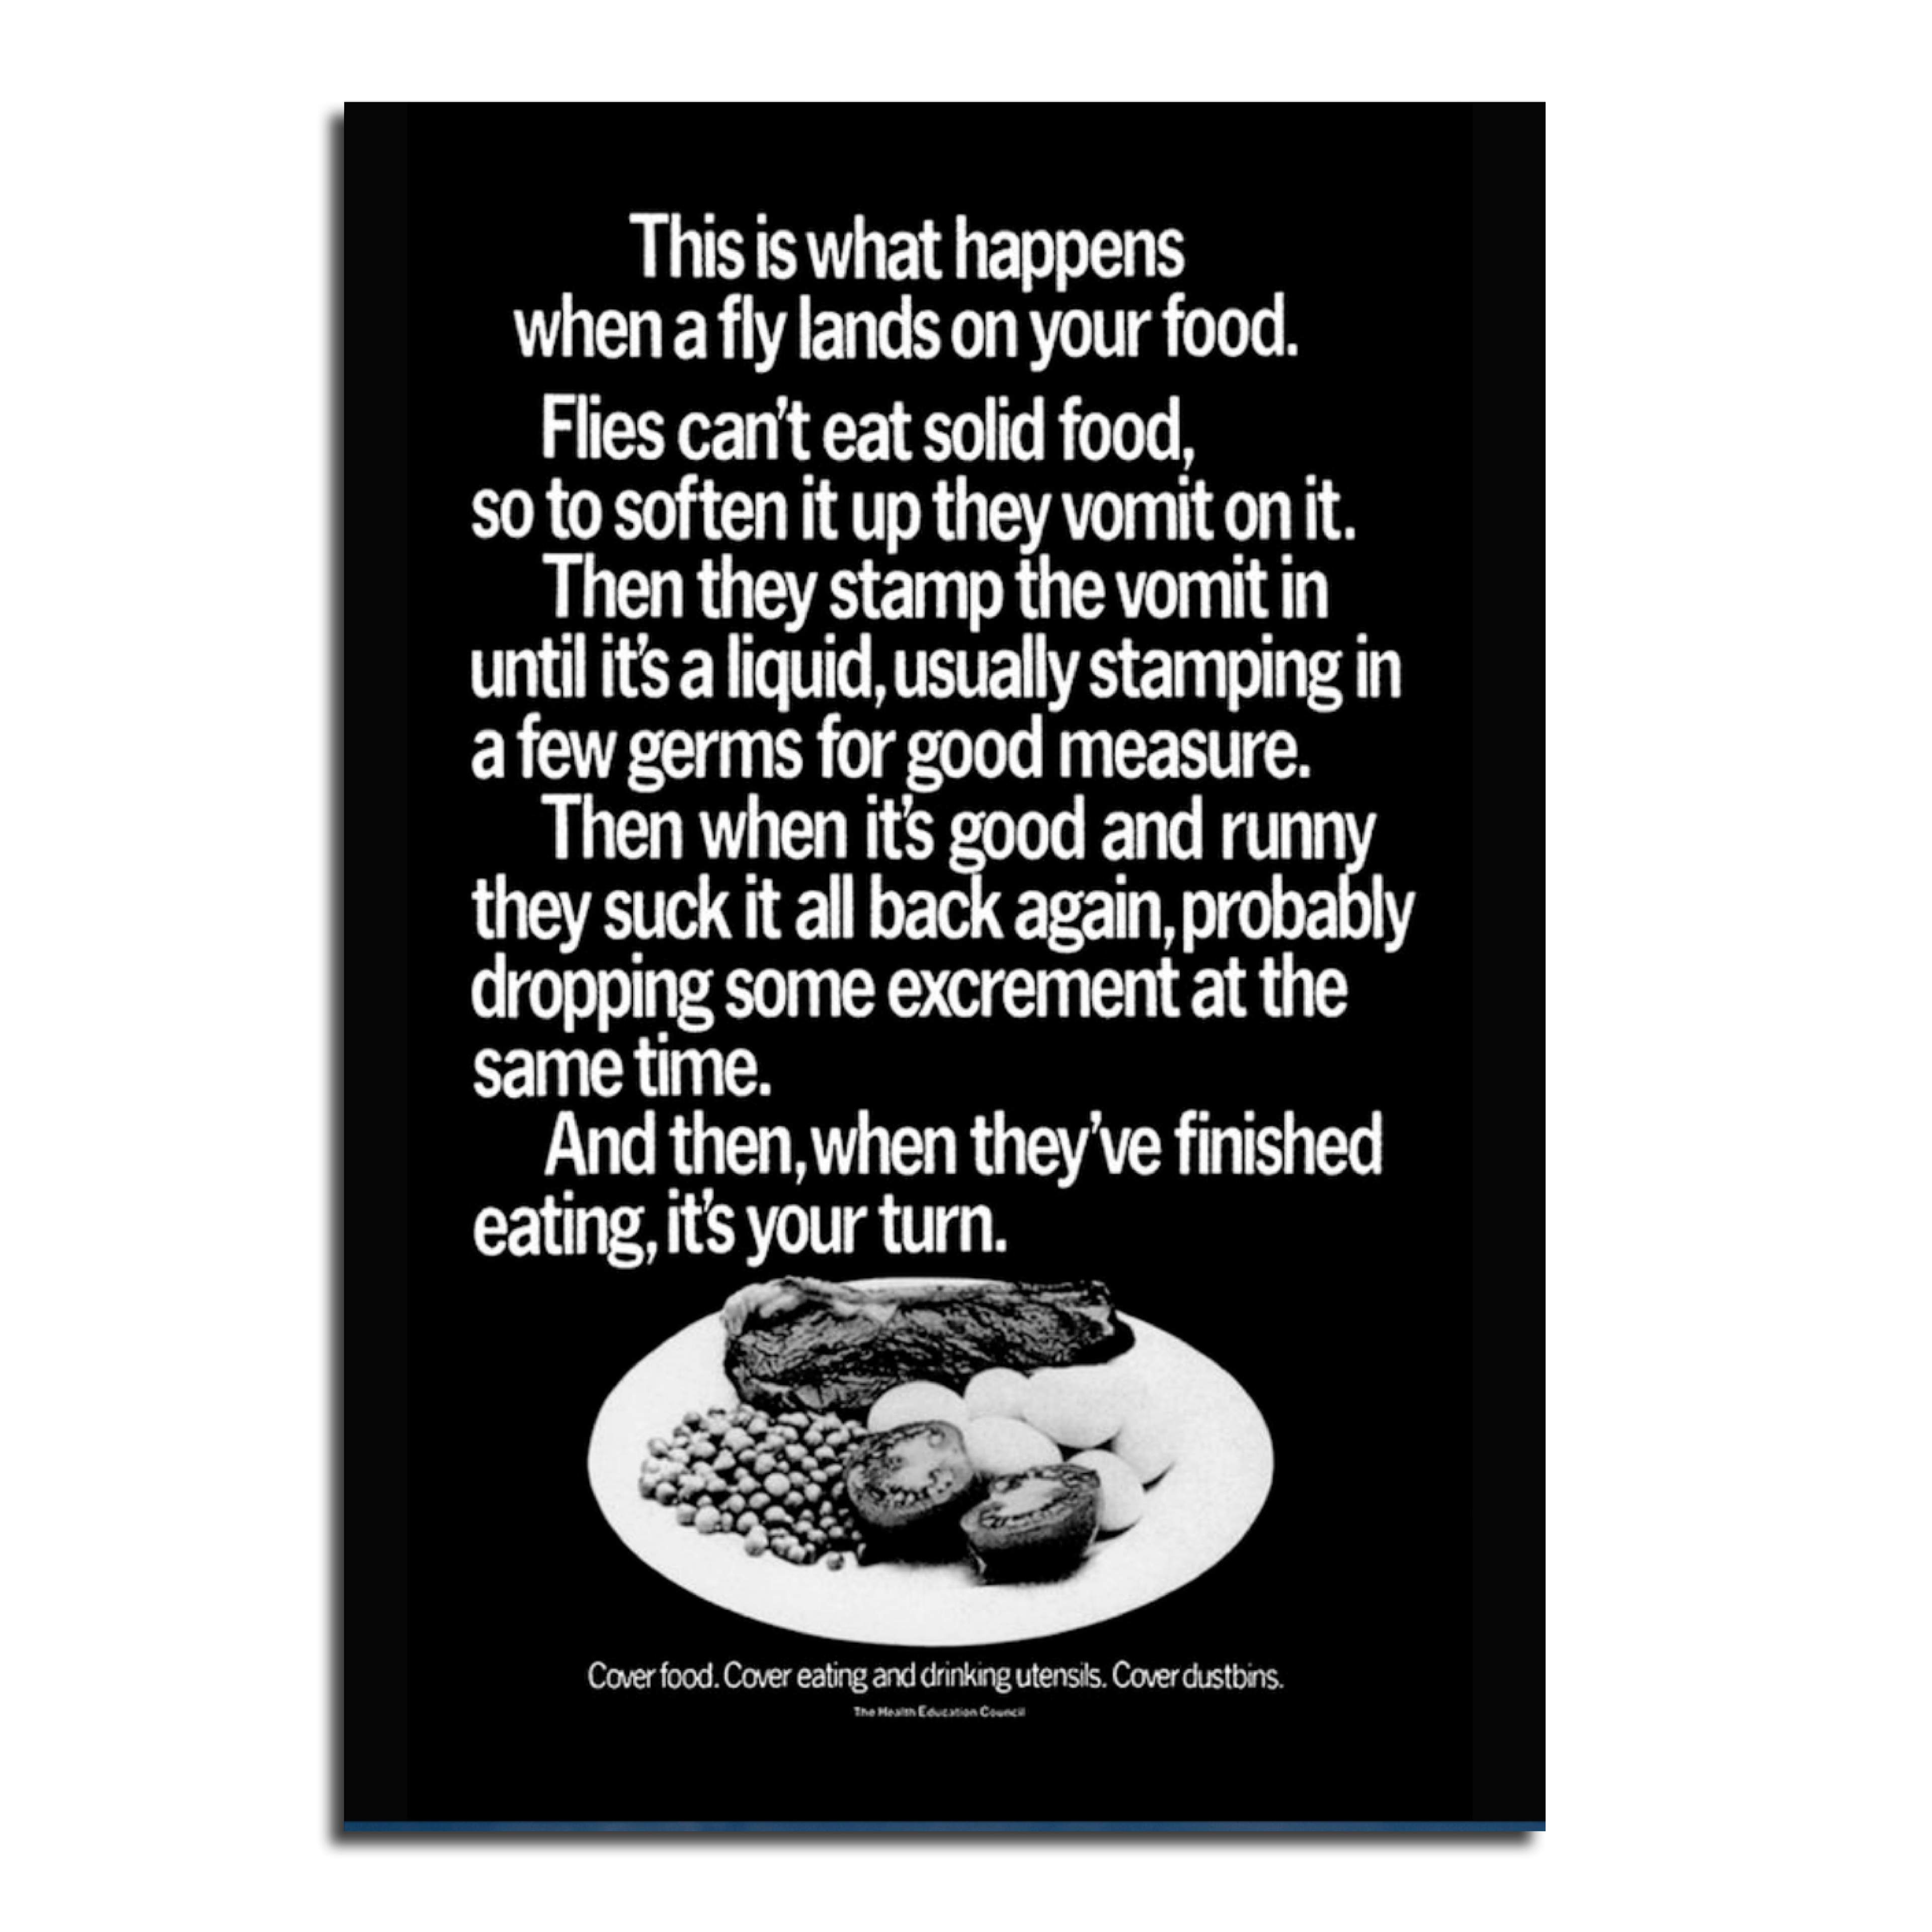 Award-winning copywriting by Charles Saatchi. A fly eating food on a dinner plate.